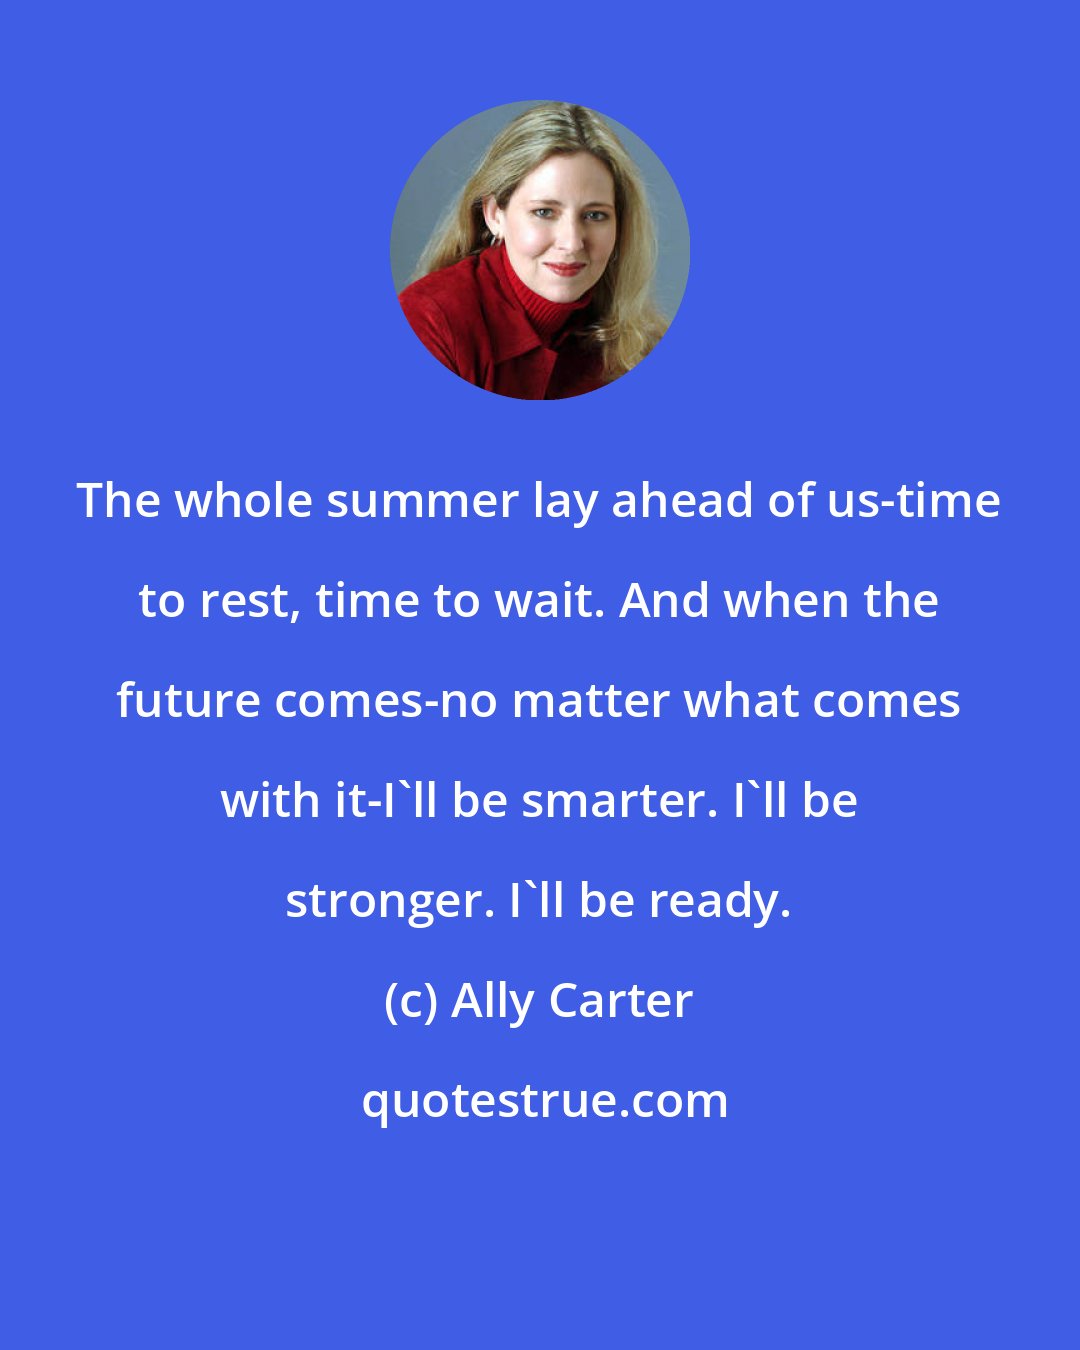 Ally Carter: The whole summer lay ahead of us-time to rest, time to wait. And when the future comes-no matter what comes with it-I'll be smarter. I'll be stronger. I'll be ready.